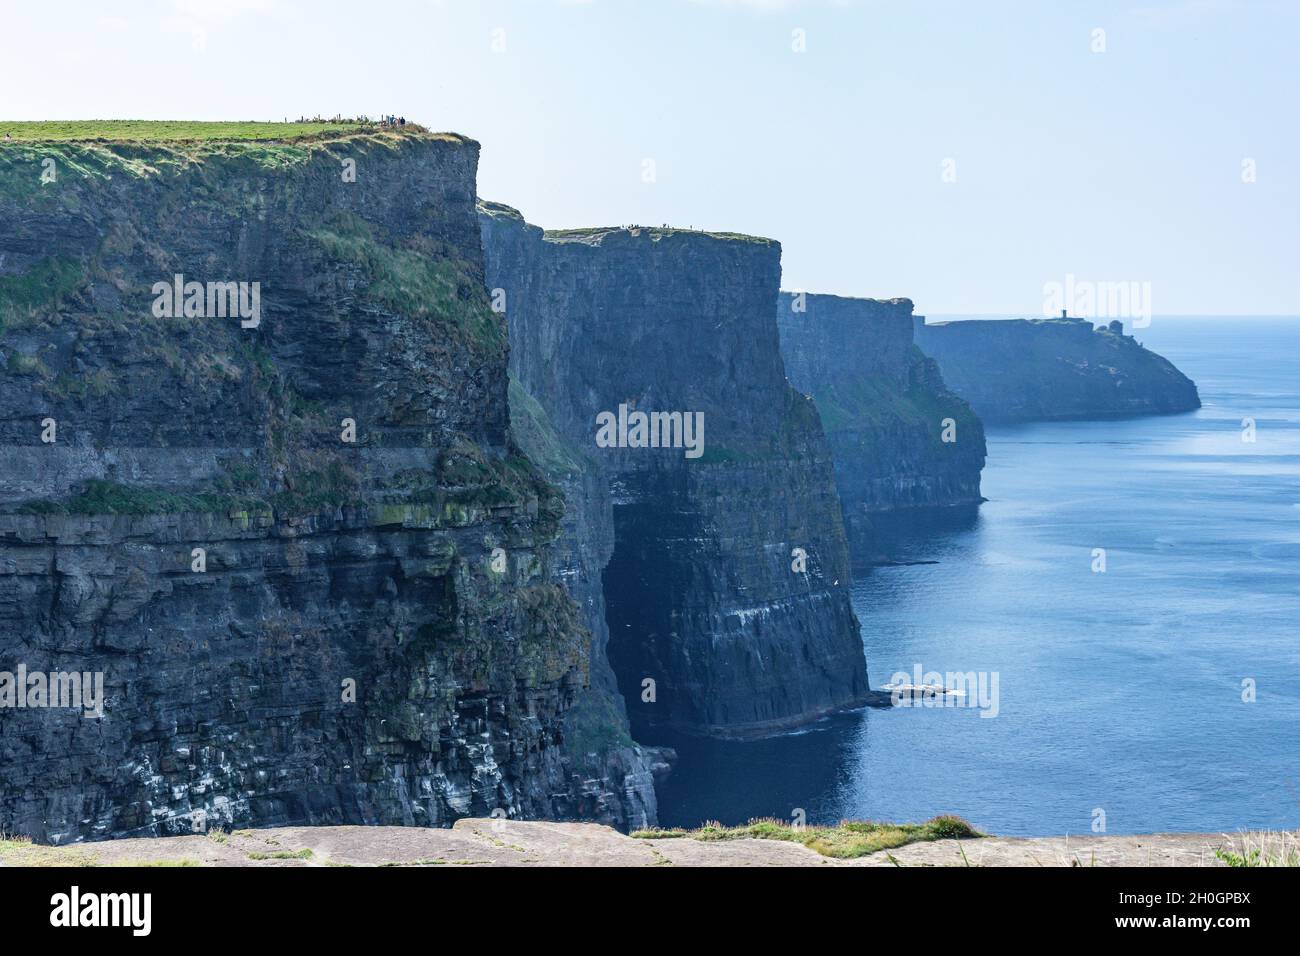 Cliffs of Moher (Aillte an Mhothair), Lahinch, County Clare, Republik Irland Stockfoto